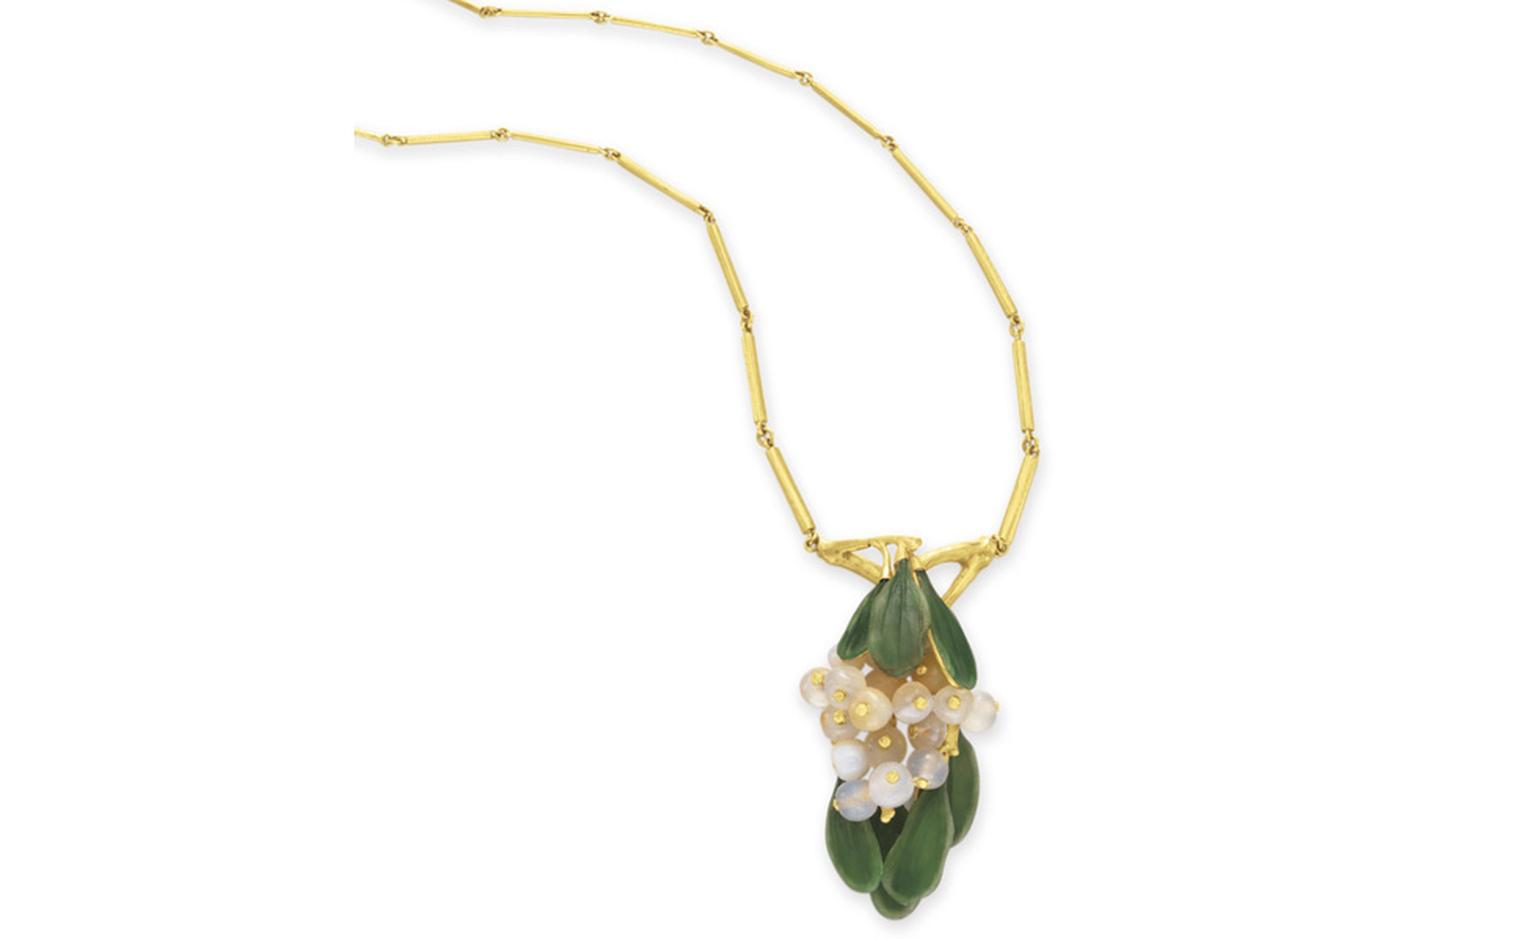 LOT 51 A COLORED GLASS AND GOLD "MISTLETOE" PENDANT NECKLACE, BY LOUIS COMFORT TIFFANY, TIFFANY & CO. By Louis Comfort Tiffany, signed Tiffany & Co., marked PP no. 5 for the Panama-Pacific International Exposition Estimate $15,000-$20,000 SOLD F...